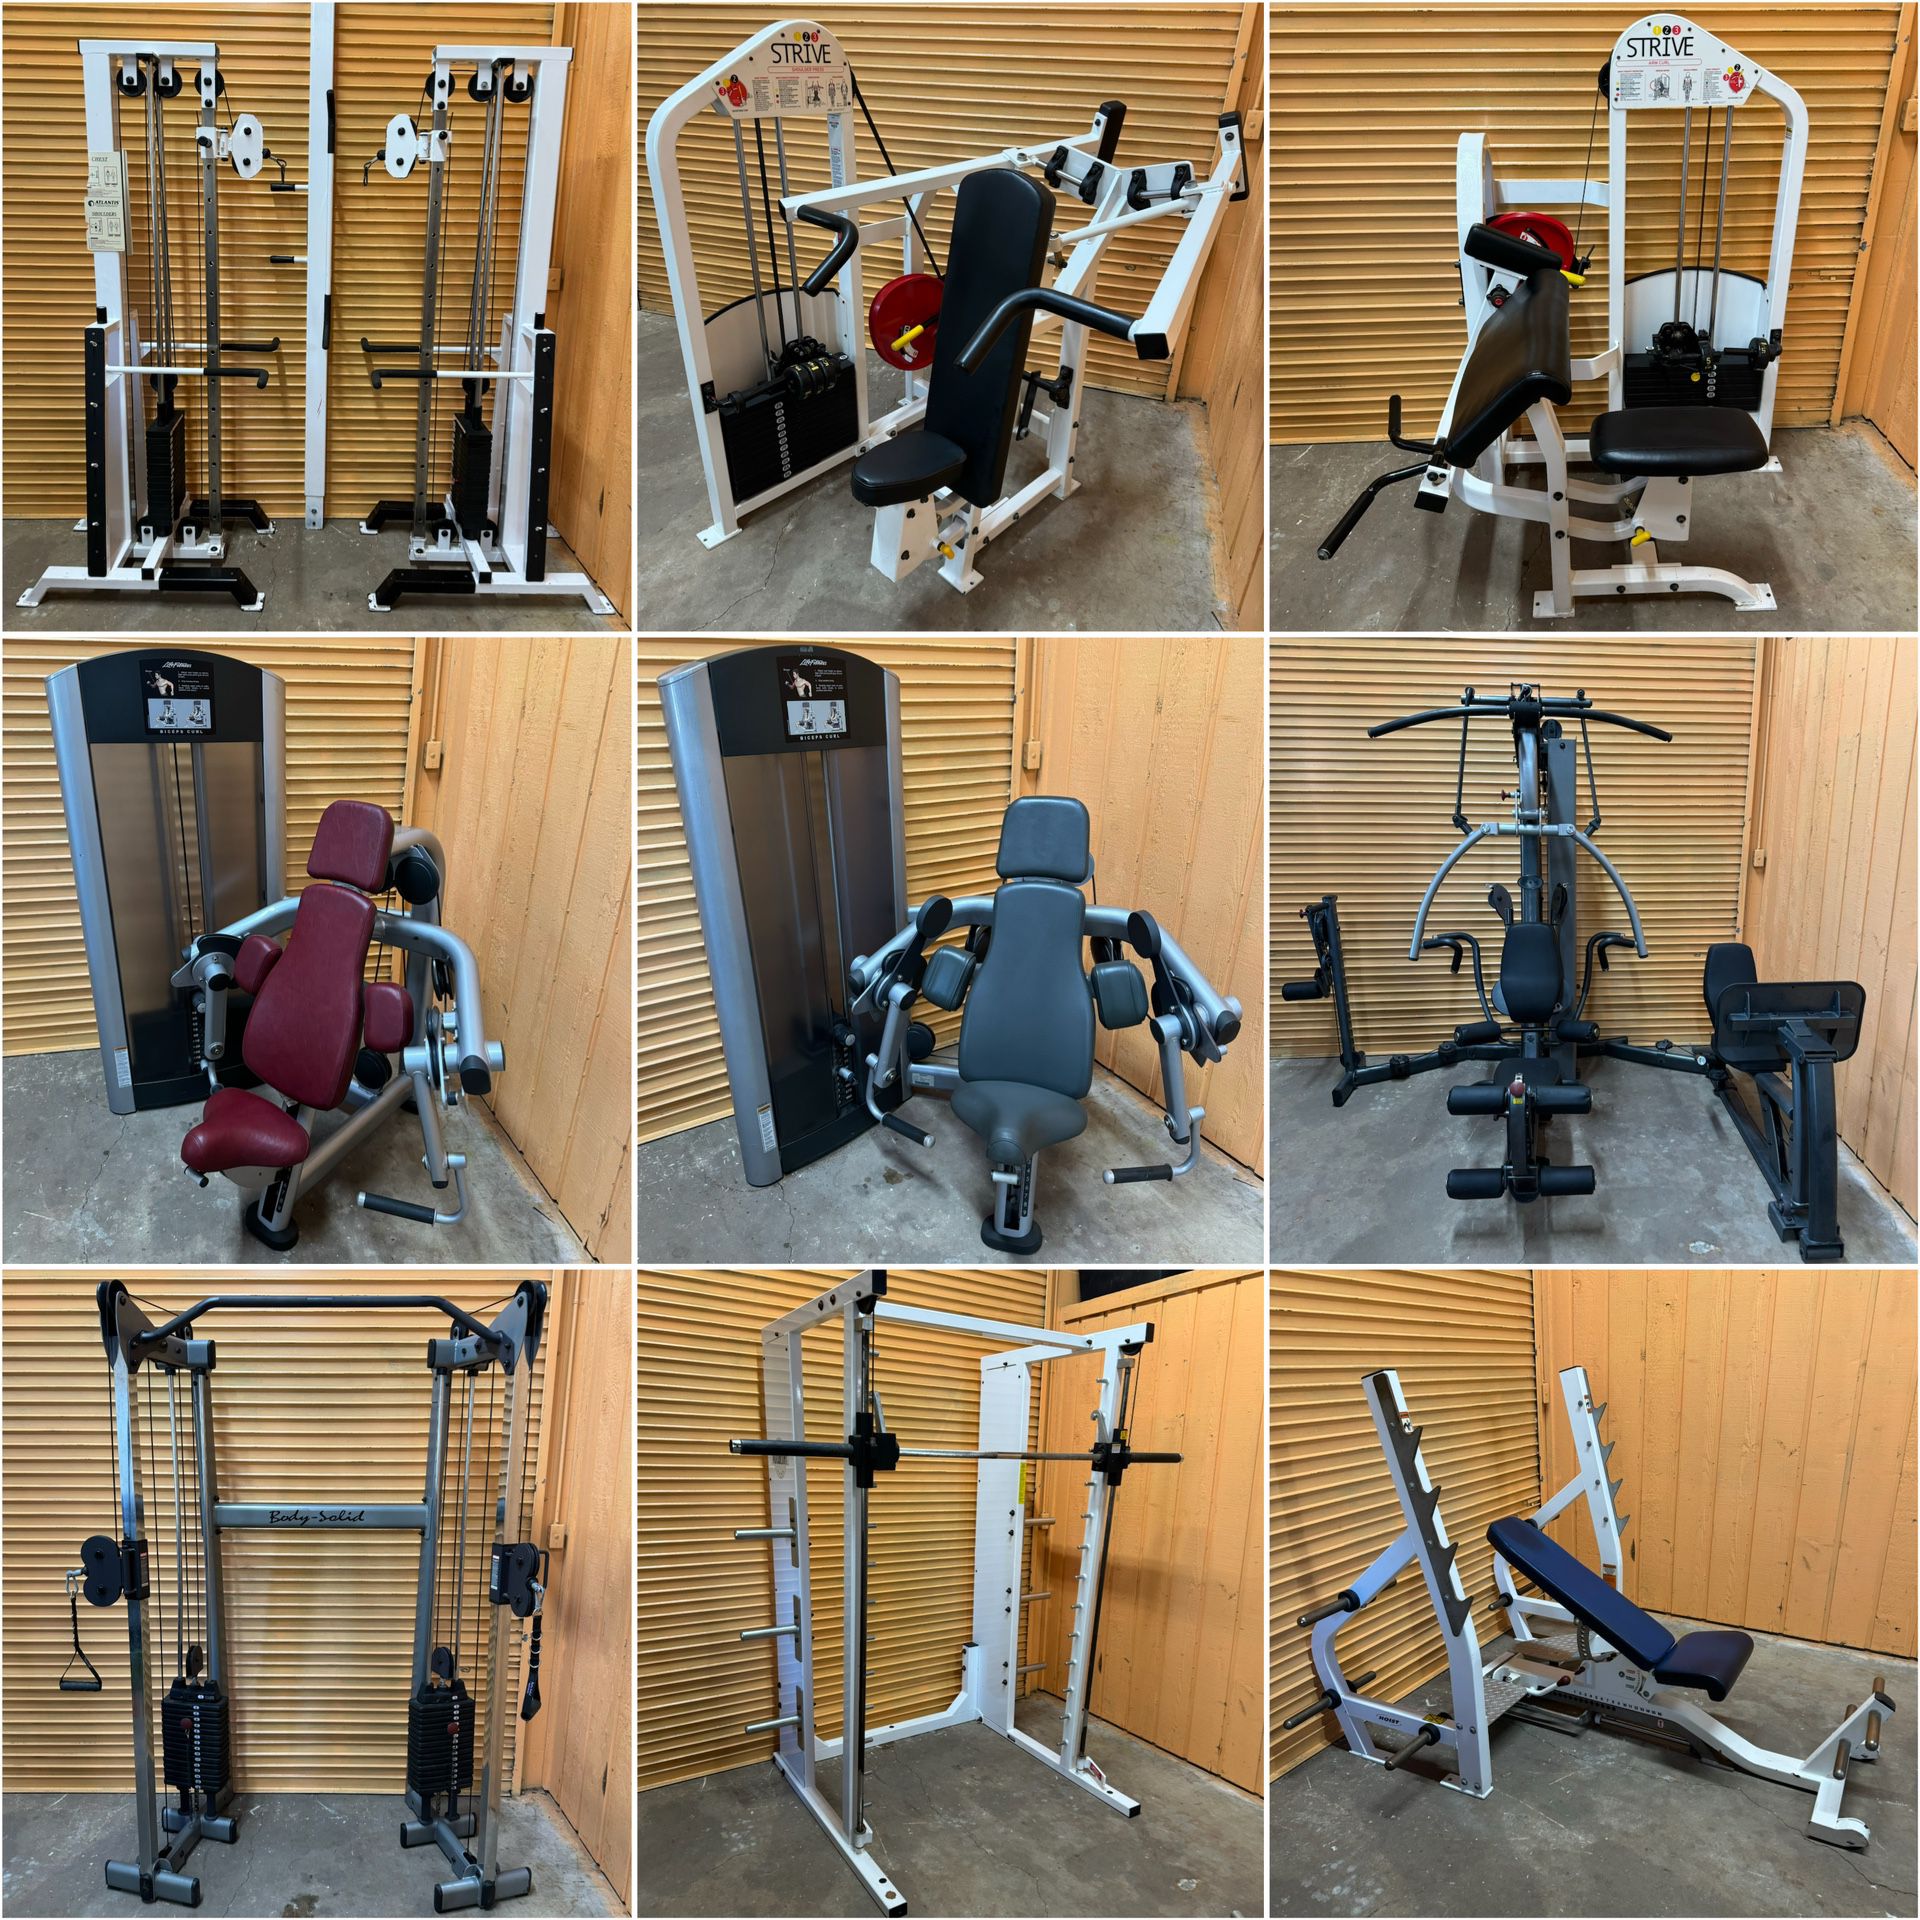 Tons of Commercial Gym Equipment- Squat Rack, Functional Trainer, Weight Bench, Leg Press, Dumbbell Cybex, Nautilus, Hammer Strength Etc